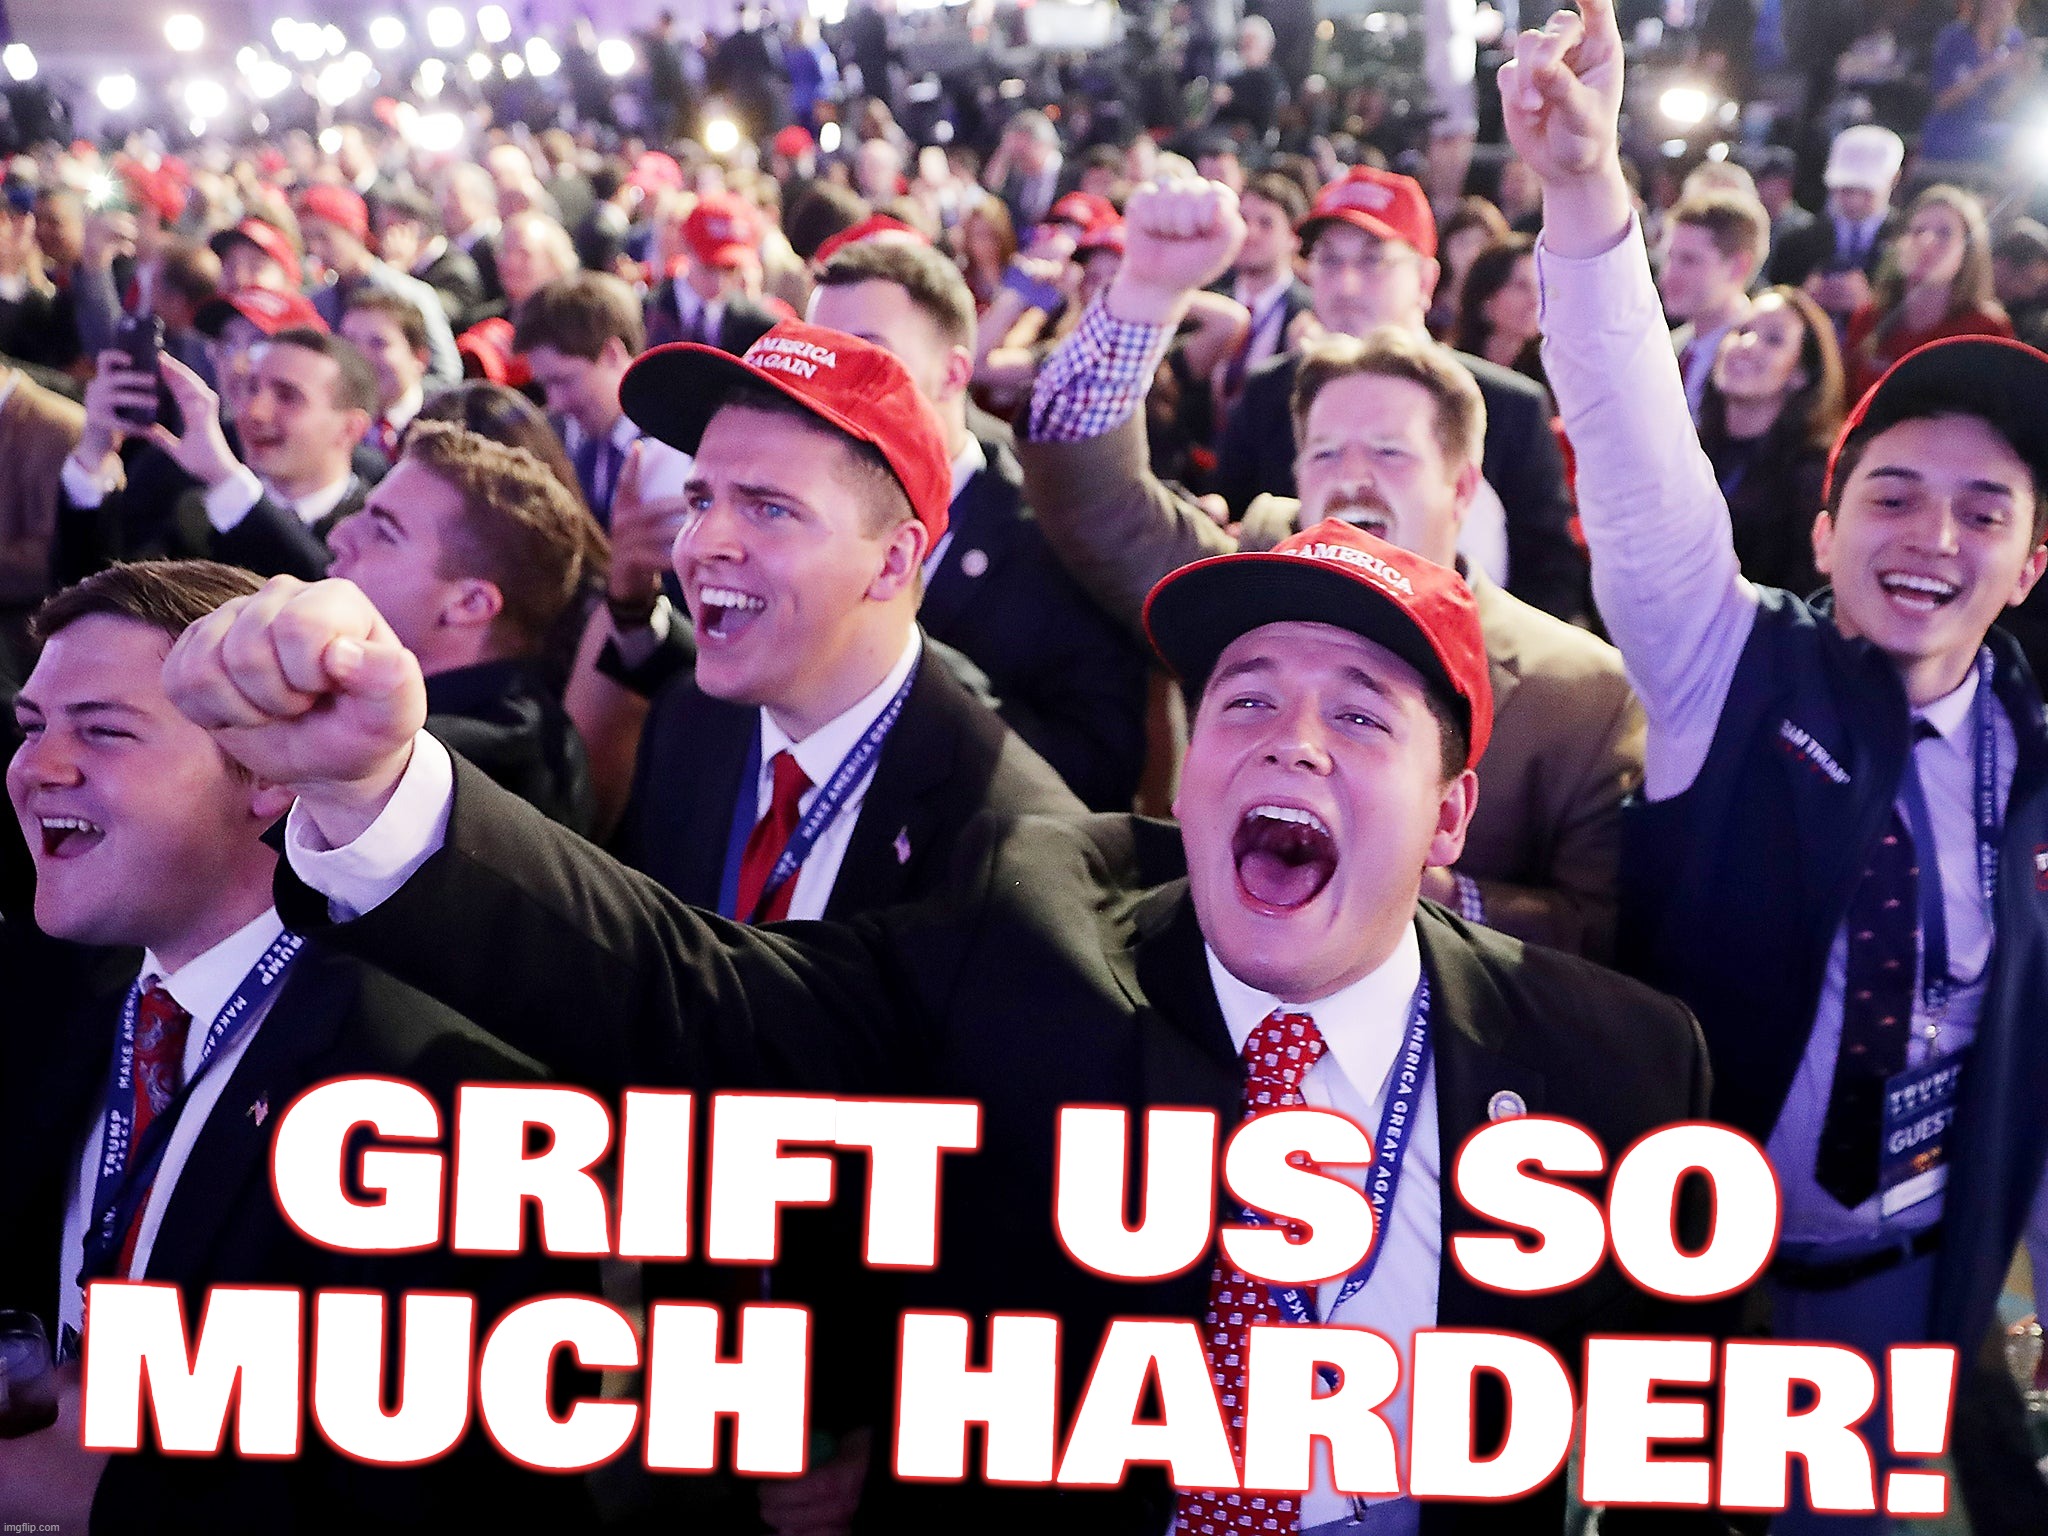 they like it hard... | GRIFT US SO MUCH HARDER! | image tagged in magats,red hat,hatred,dumb people,losers,incels | made w/ Imgflip meme maker